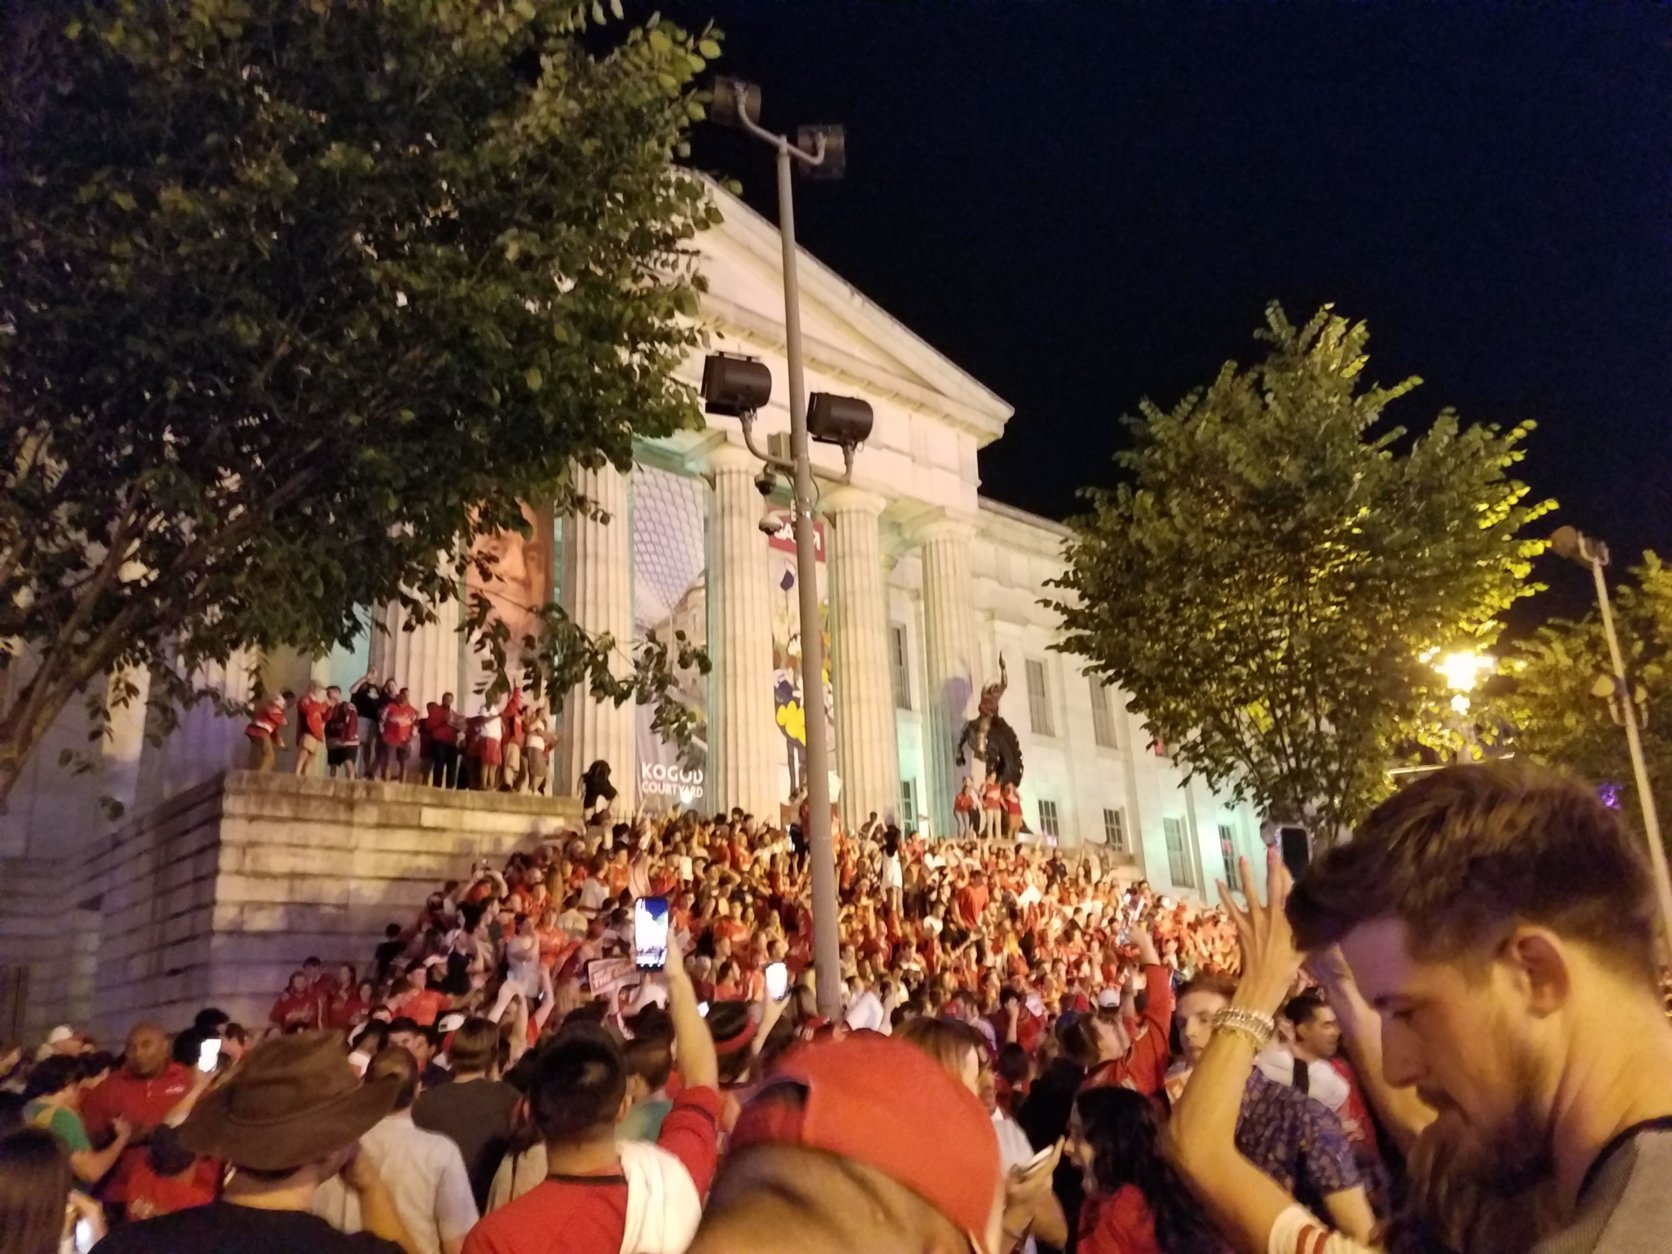 Fans gather in Washington, D.C. after the Washington Capitals beat the Tampa Bay Lightning 4-0 in Game 7 on Wednesday, May 23, 2018. (WTOP/Lisa Weiner)